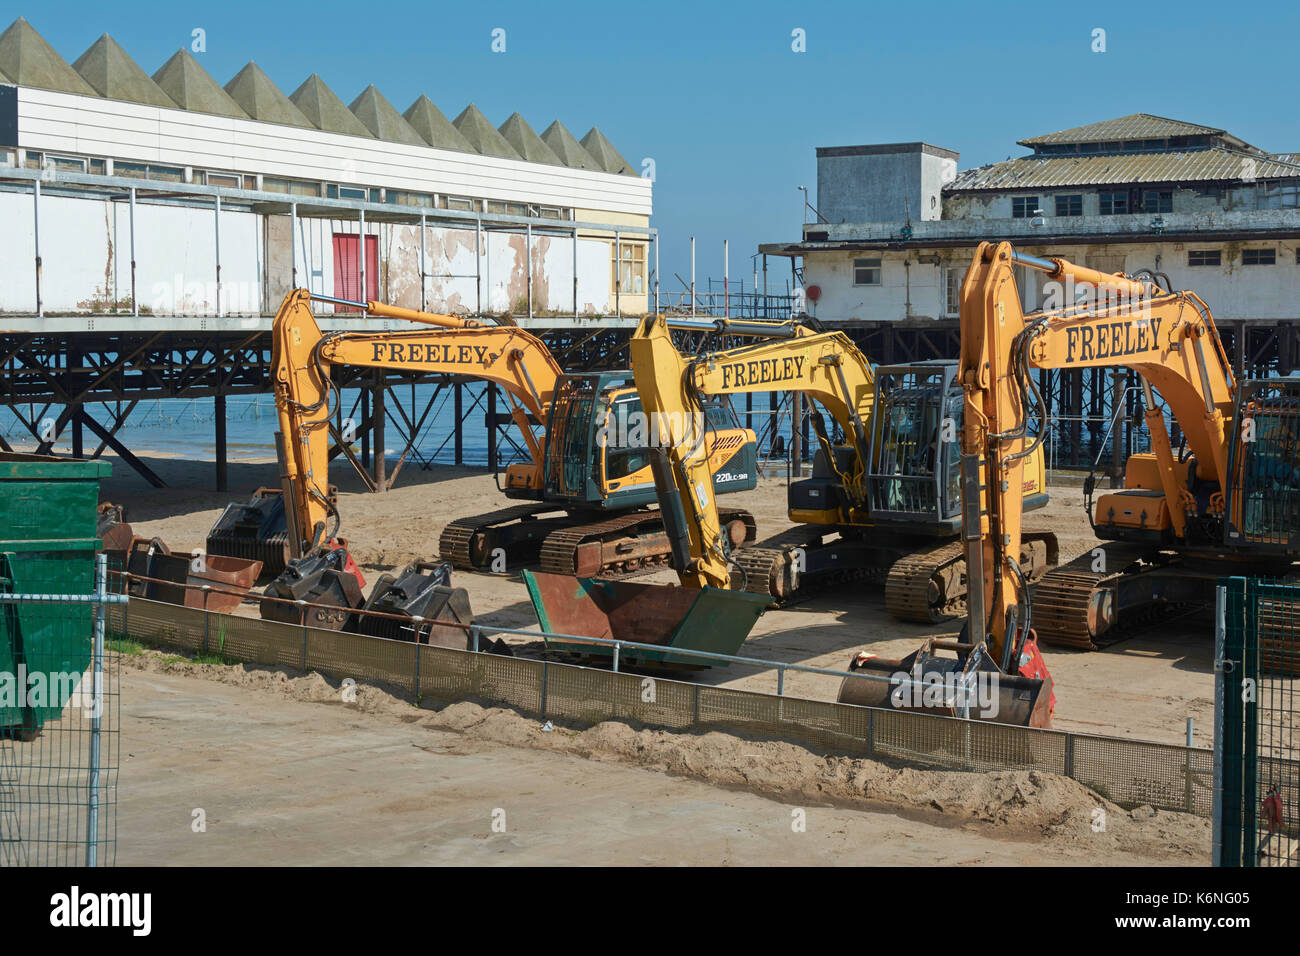 Redevelopment of the Pier at Colwyn Bay - Wales, UK Stock Photo